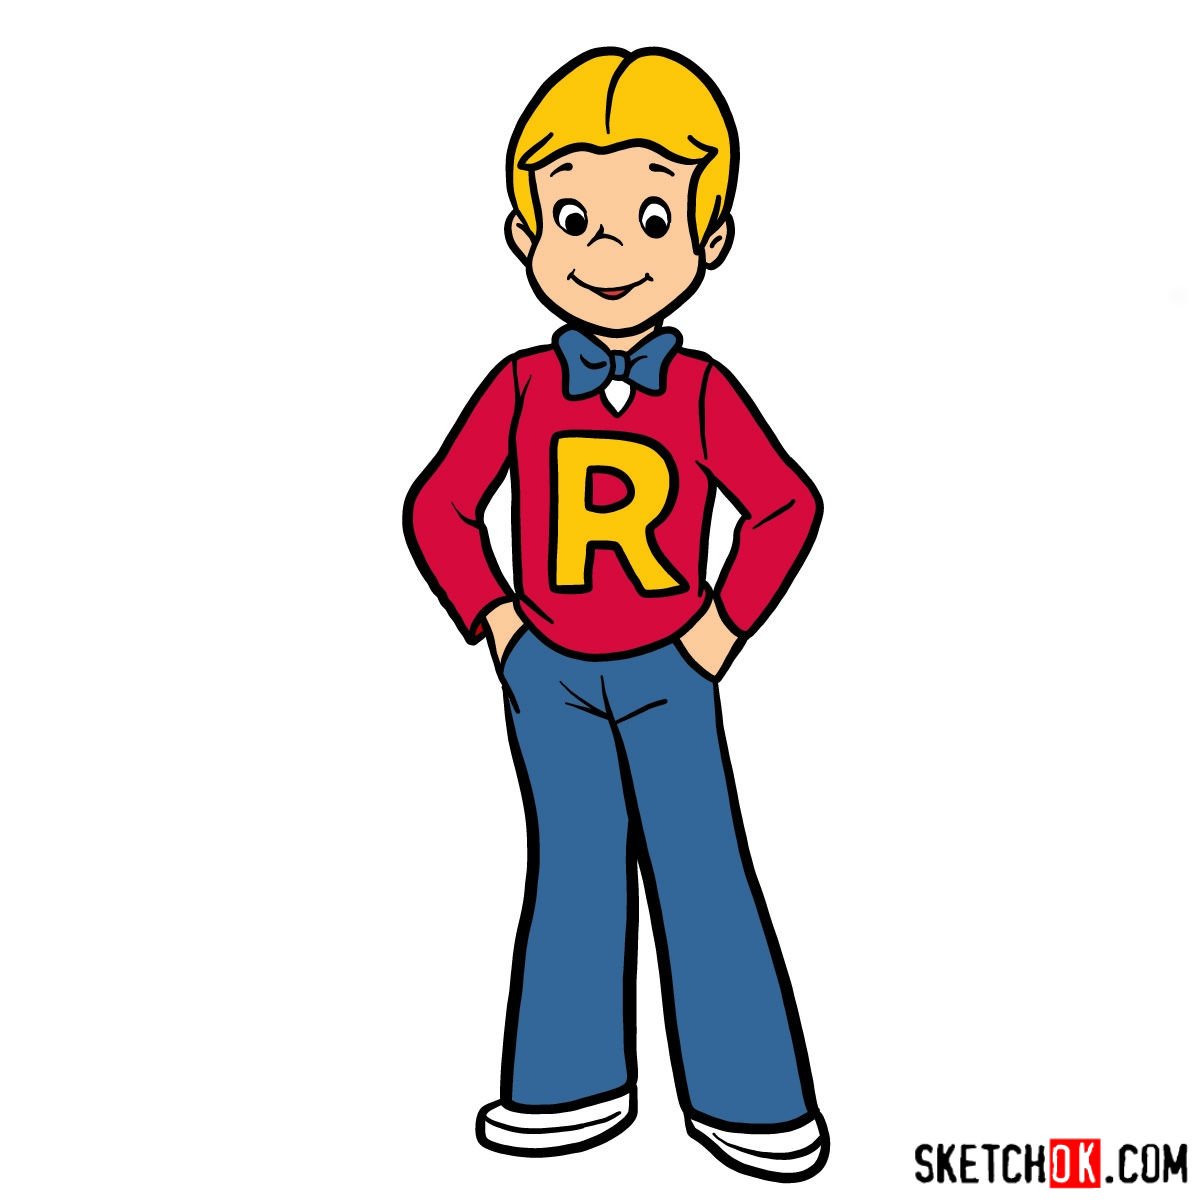 How to draw Richie Rich (cartoon style) - Sketchok easy drawing guides